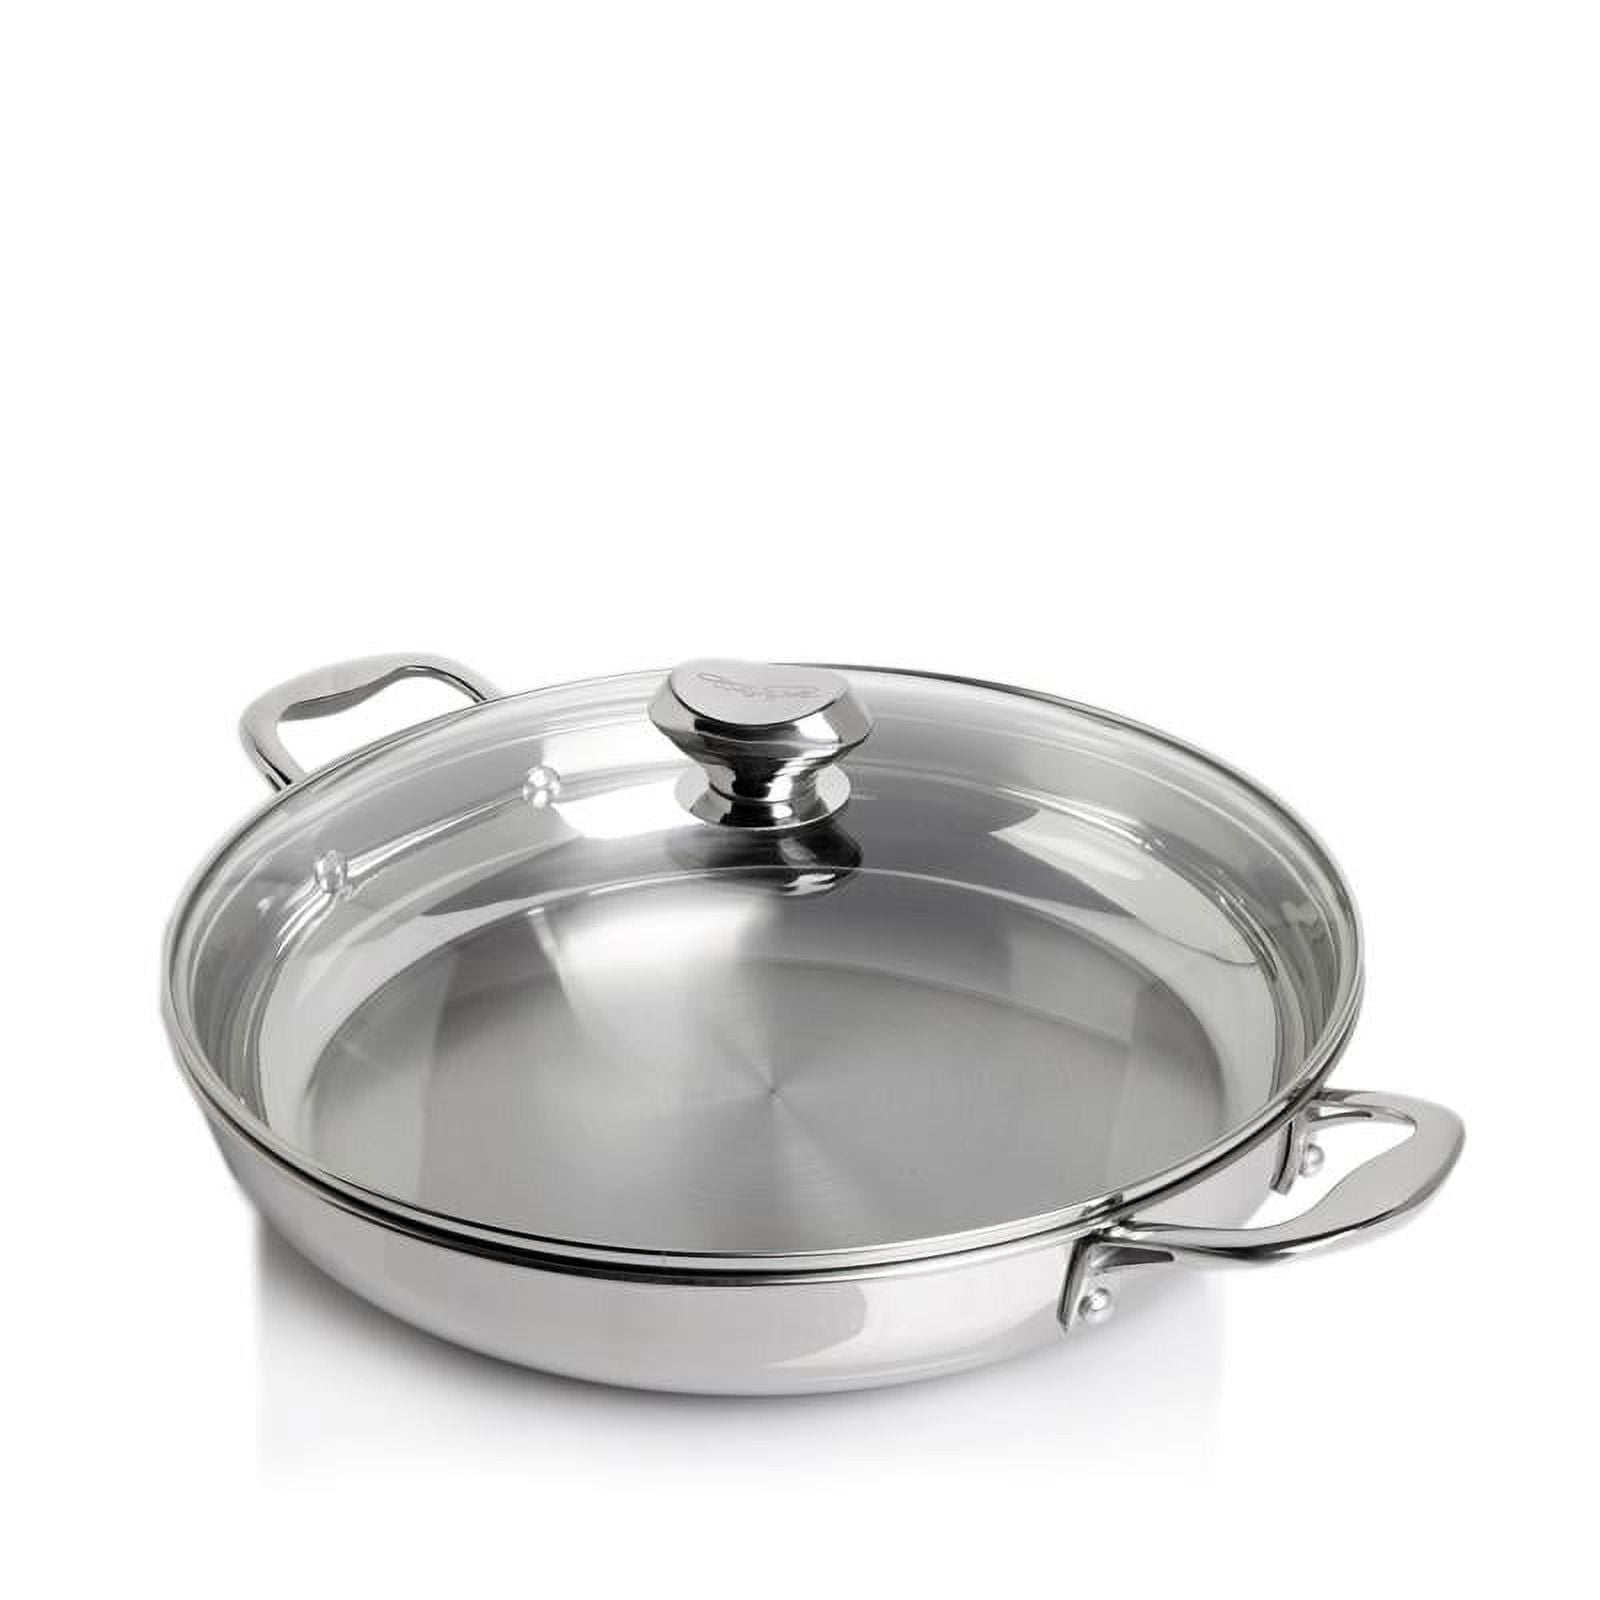 Wolfgang Puck 13-piece Stainless Steel Cookware Set 768-189 (Refurbished w/  60-Day Returns) - Ships Quick!